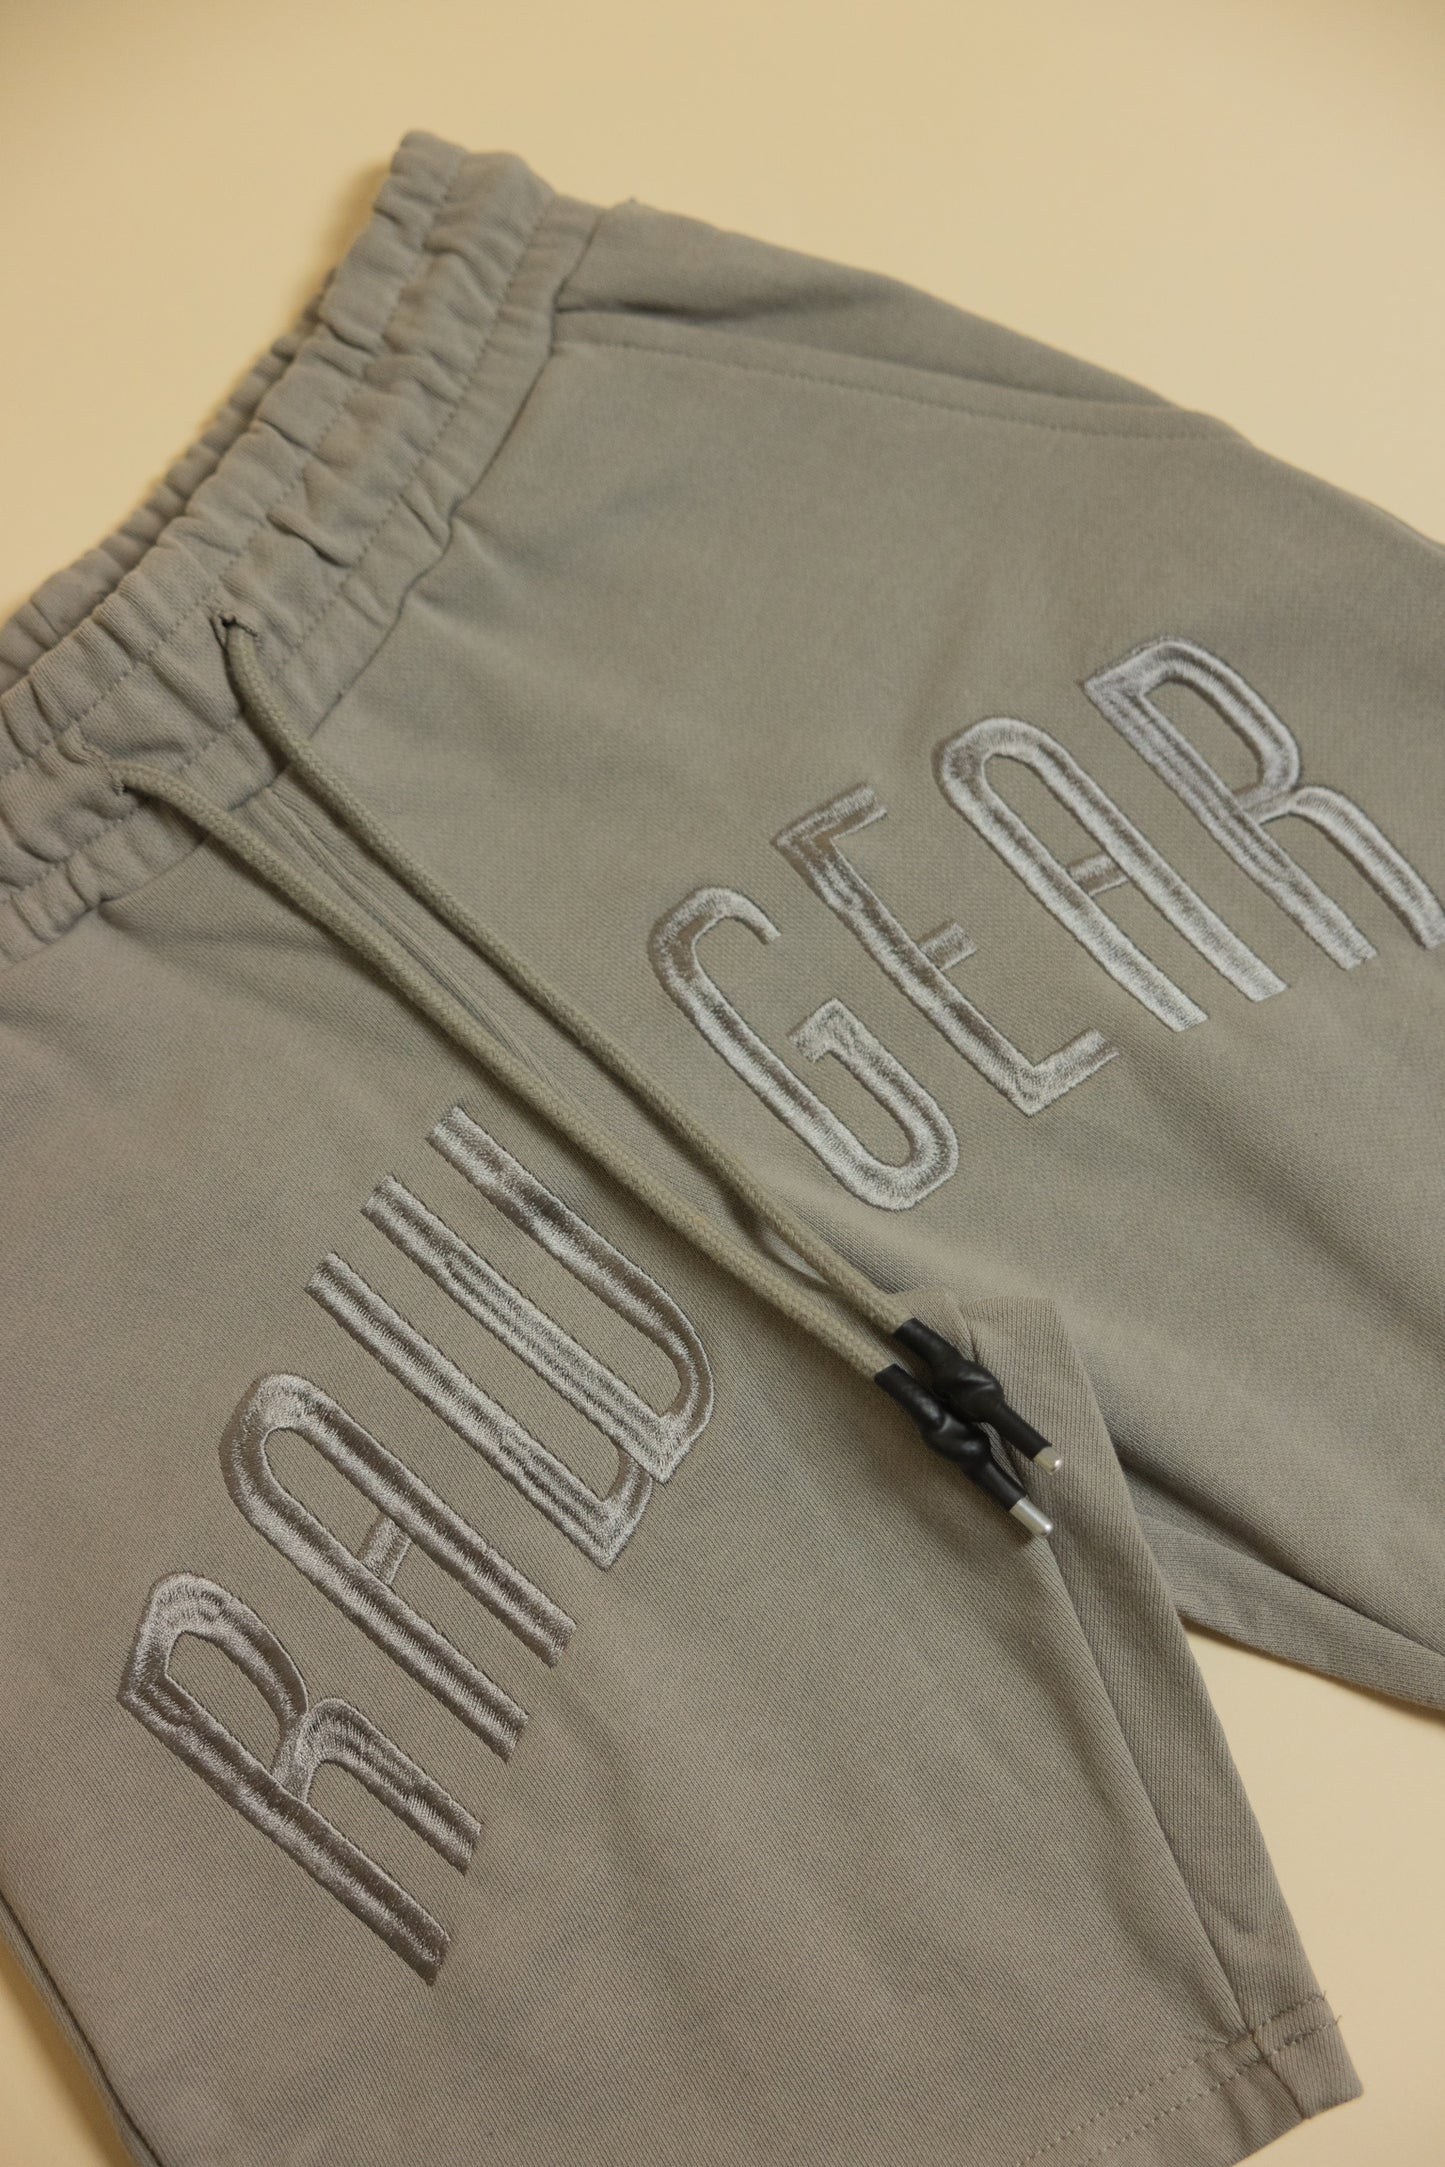 Special : RAWGEAR Front Embroidery Shorts